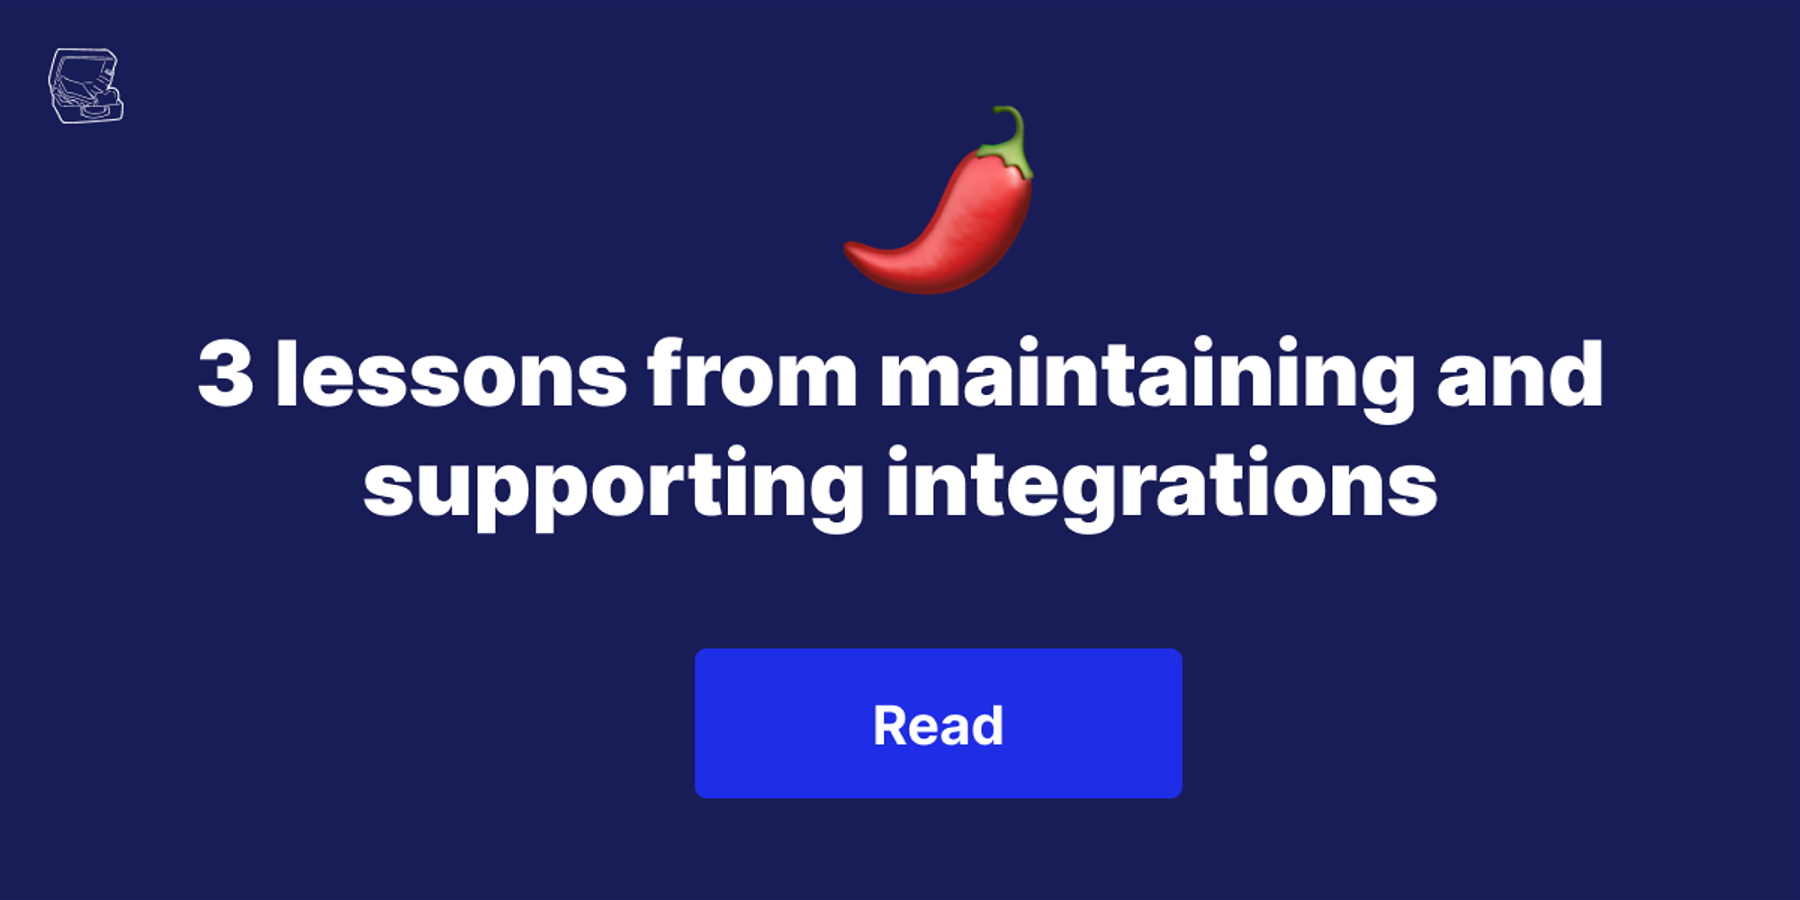 3 Lessons from maintaining integrations that support thousands of users